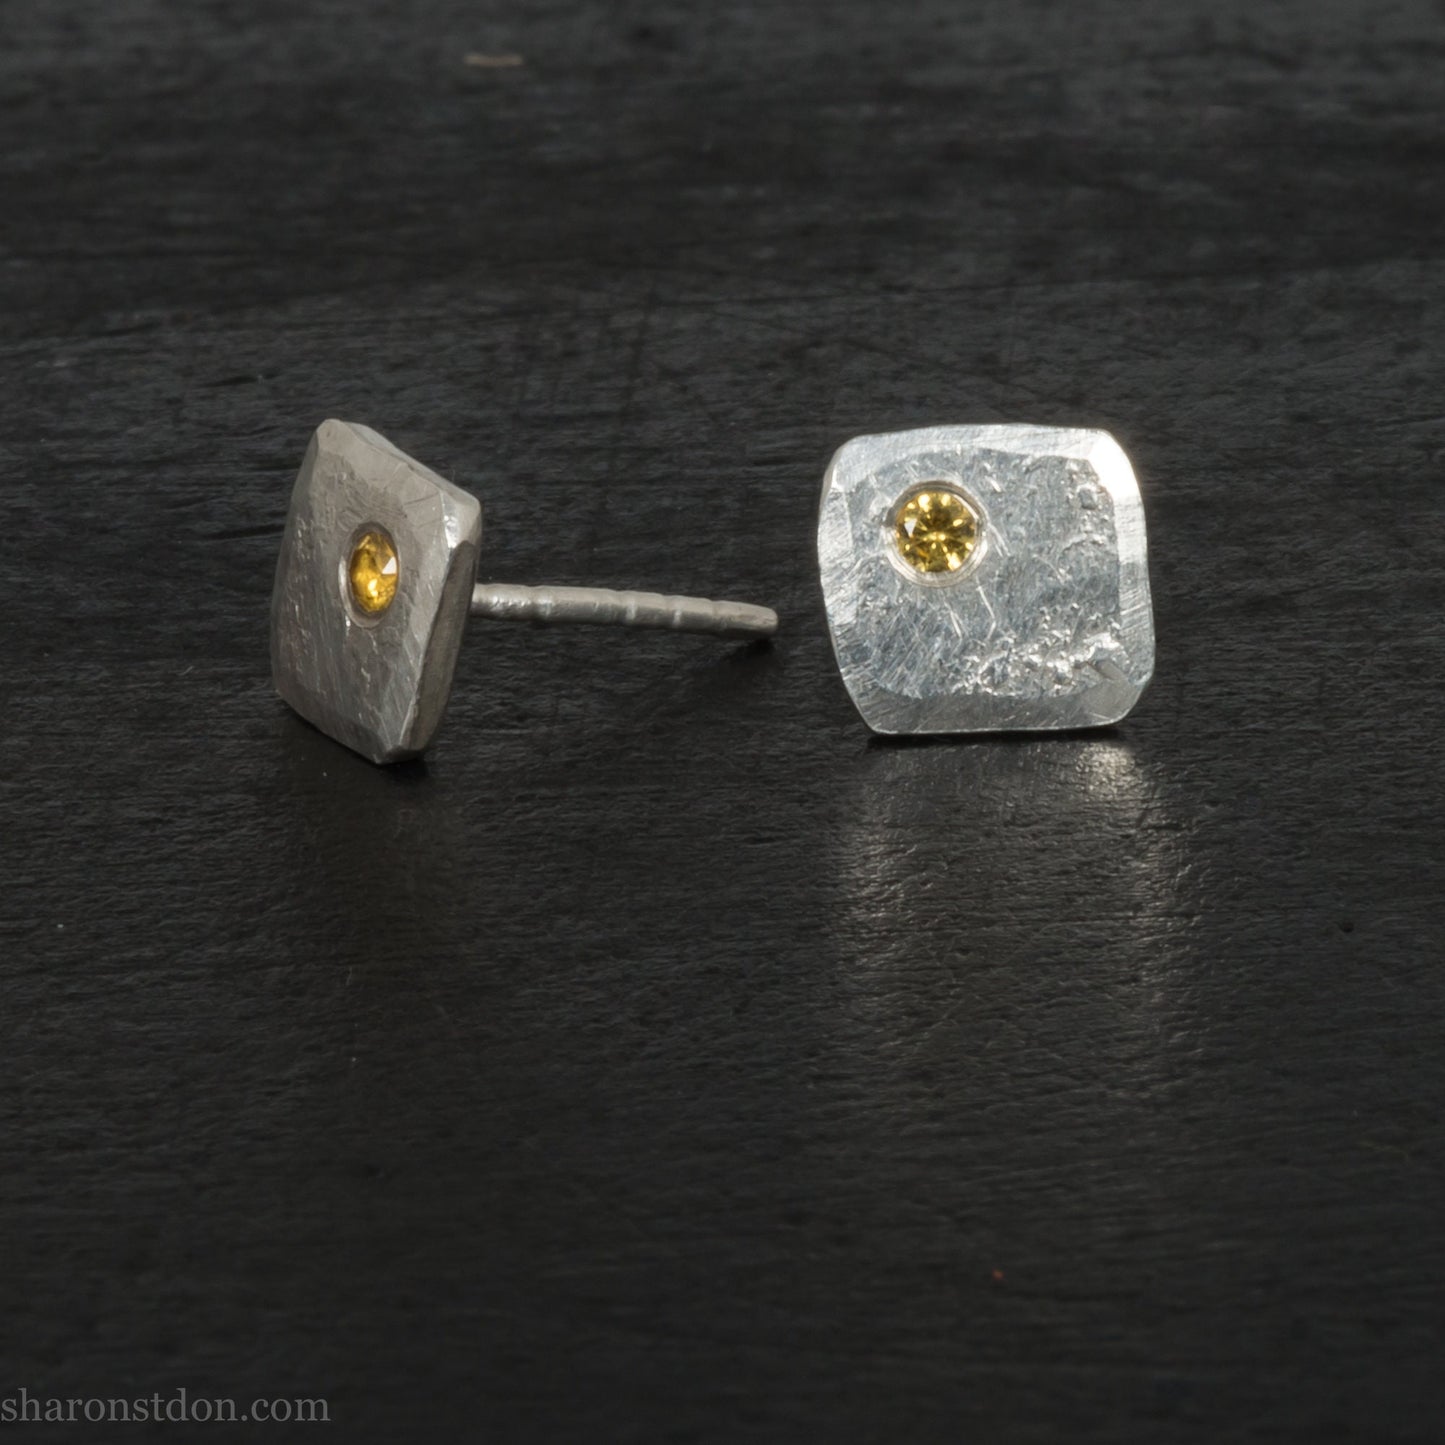 Canary yellow diamond stud earrings | Small square 925 sterling silver and gemstone stud earrings | Handmade, unique gift for him or her..